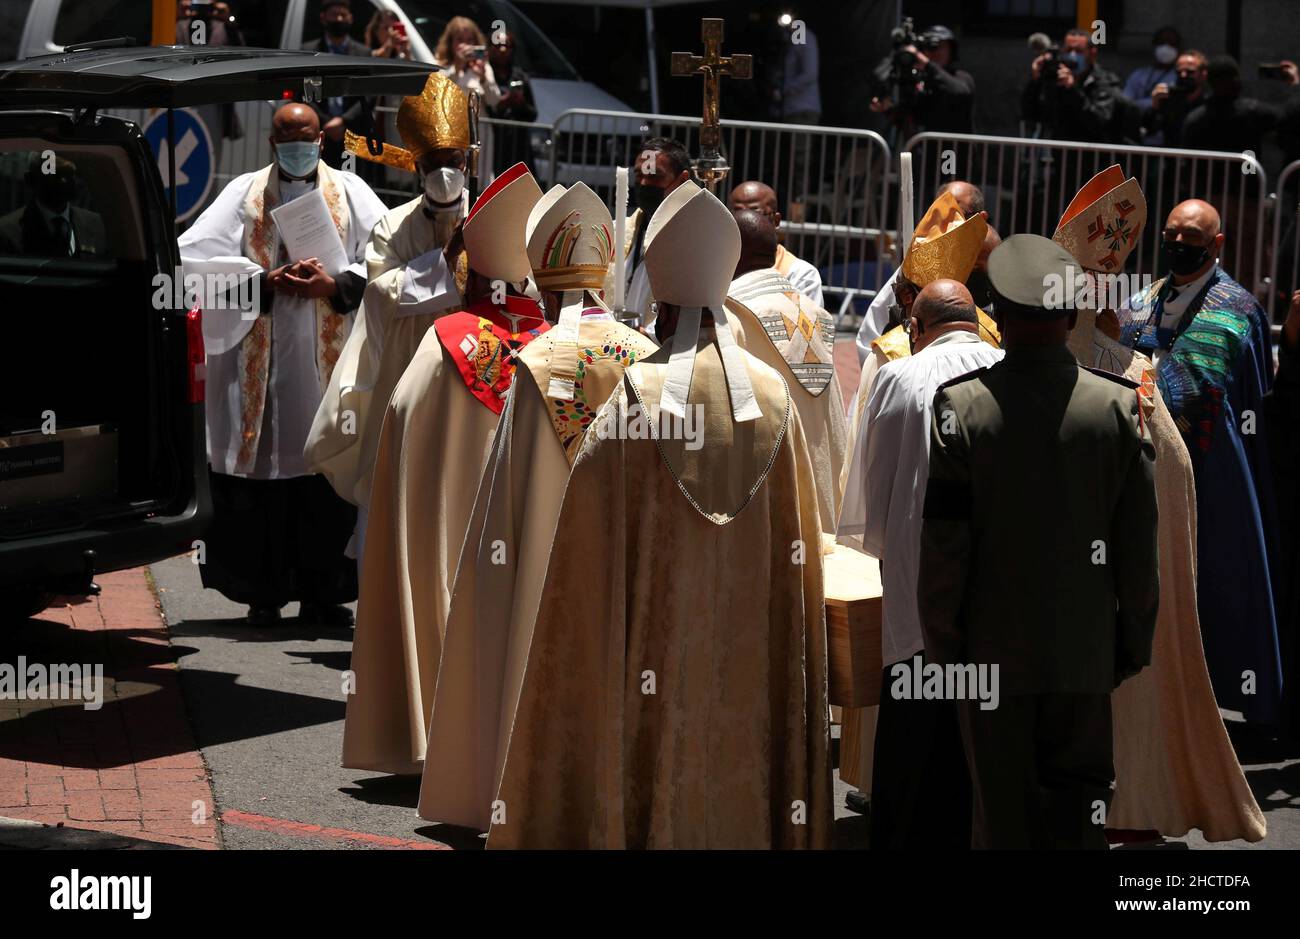 Pallbearers carry the casket holding the body of Archbishop Desmond Tutu after his funeral service at St George's Cathedral in Cape Town, South Africa, January 1, 2022. REUTERS/Mike Hutchings Stock Photo